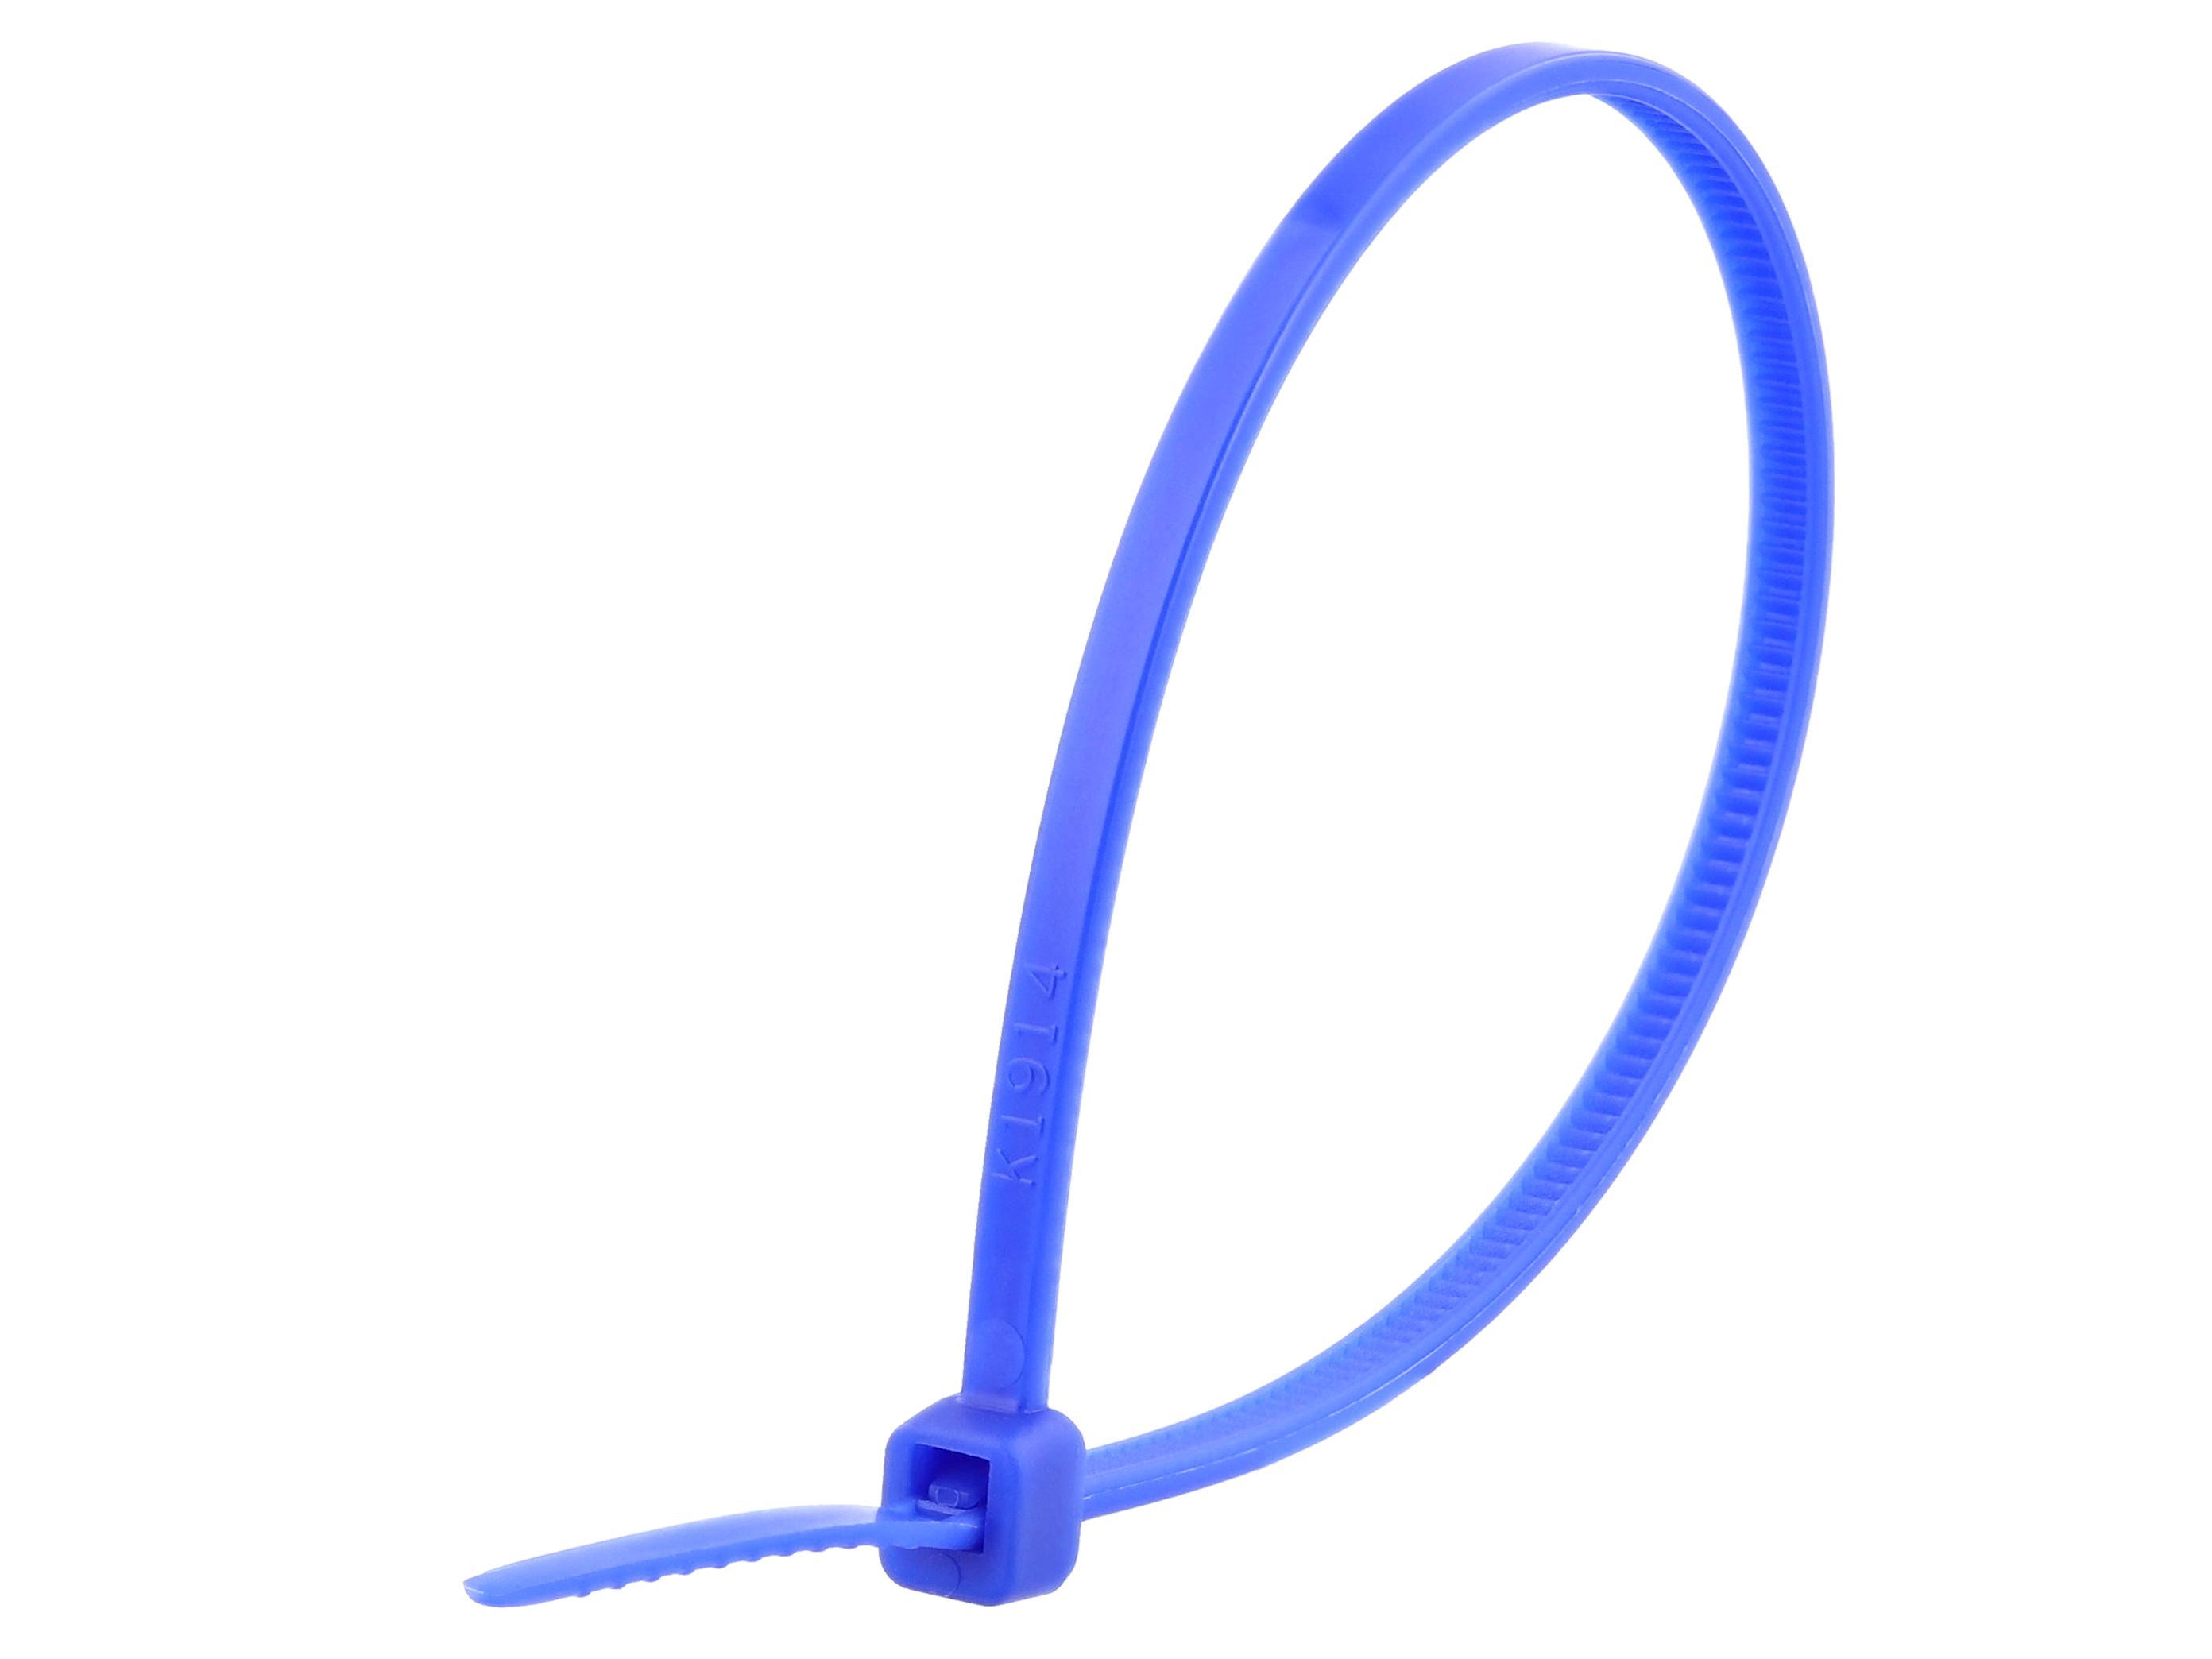 6 Inch Blue Mini Cable Tie - 100 Pack - Secure™ Cable Ties